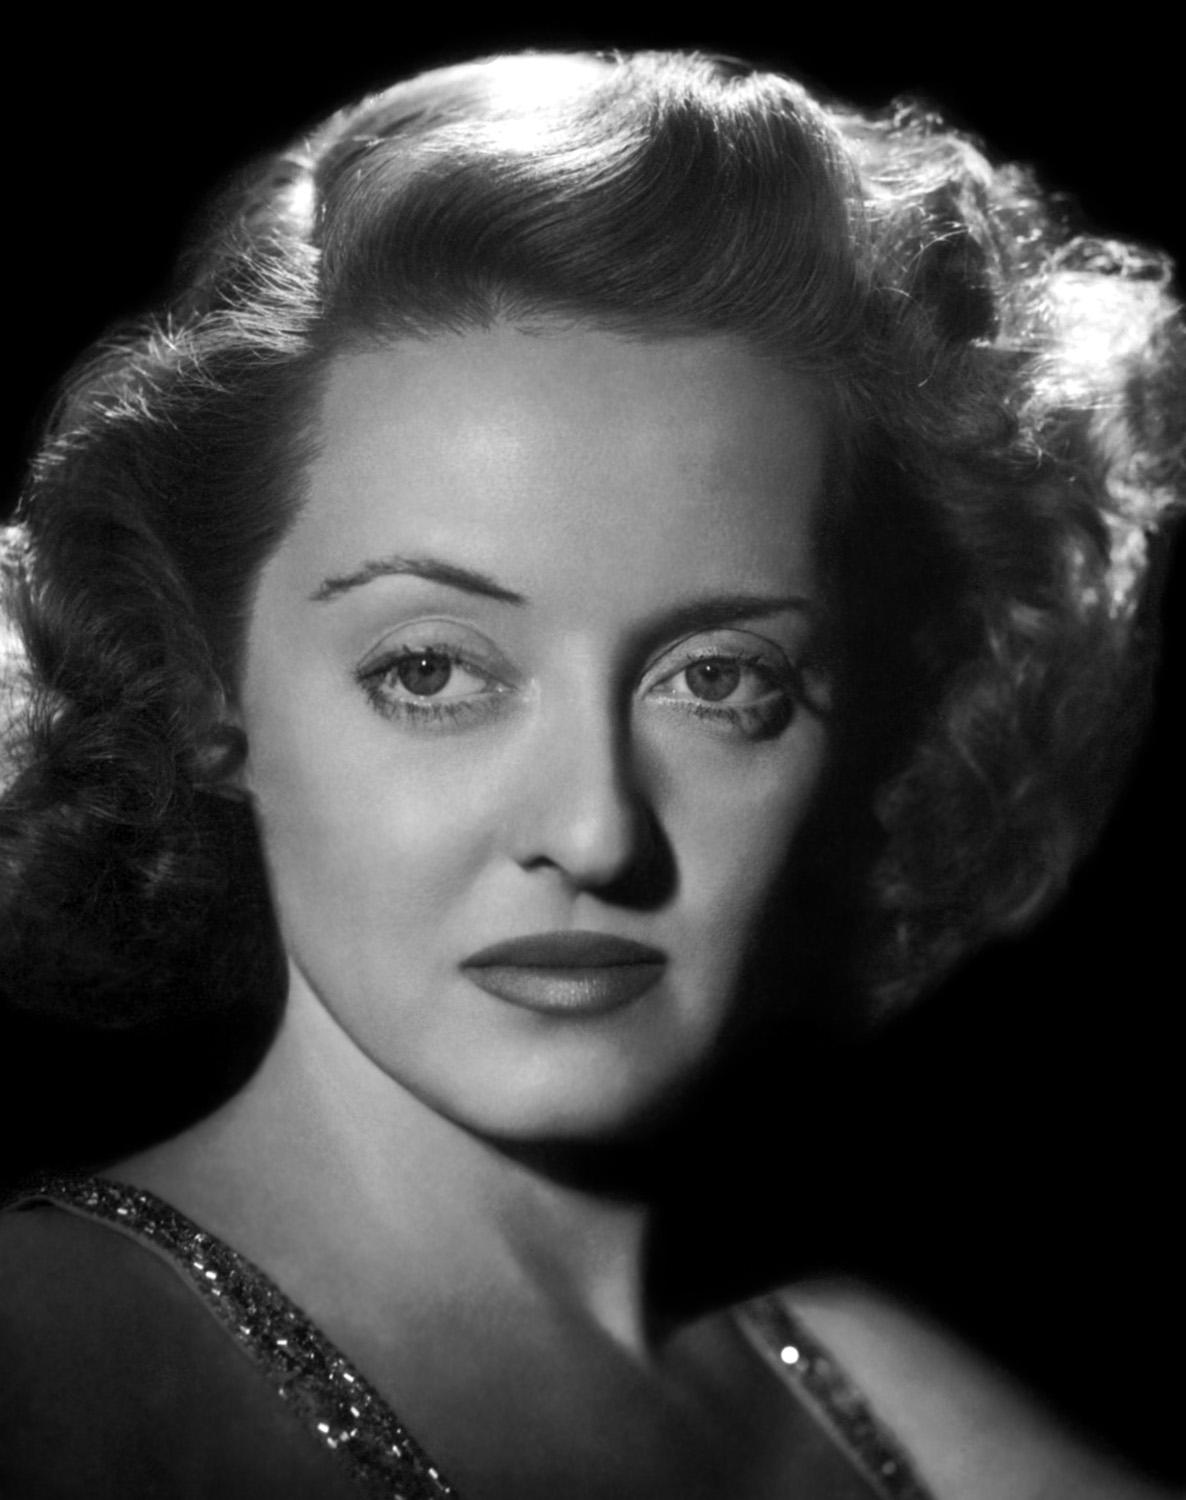 Vintage image bette davis 1930s actress HD wallpaper and background